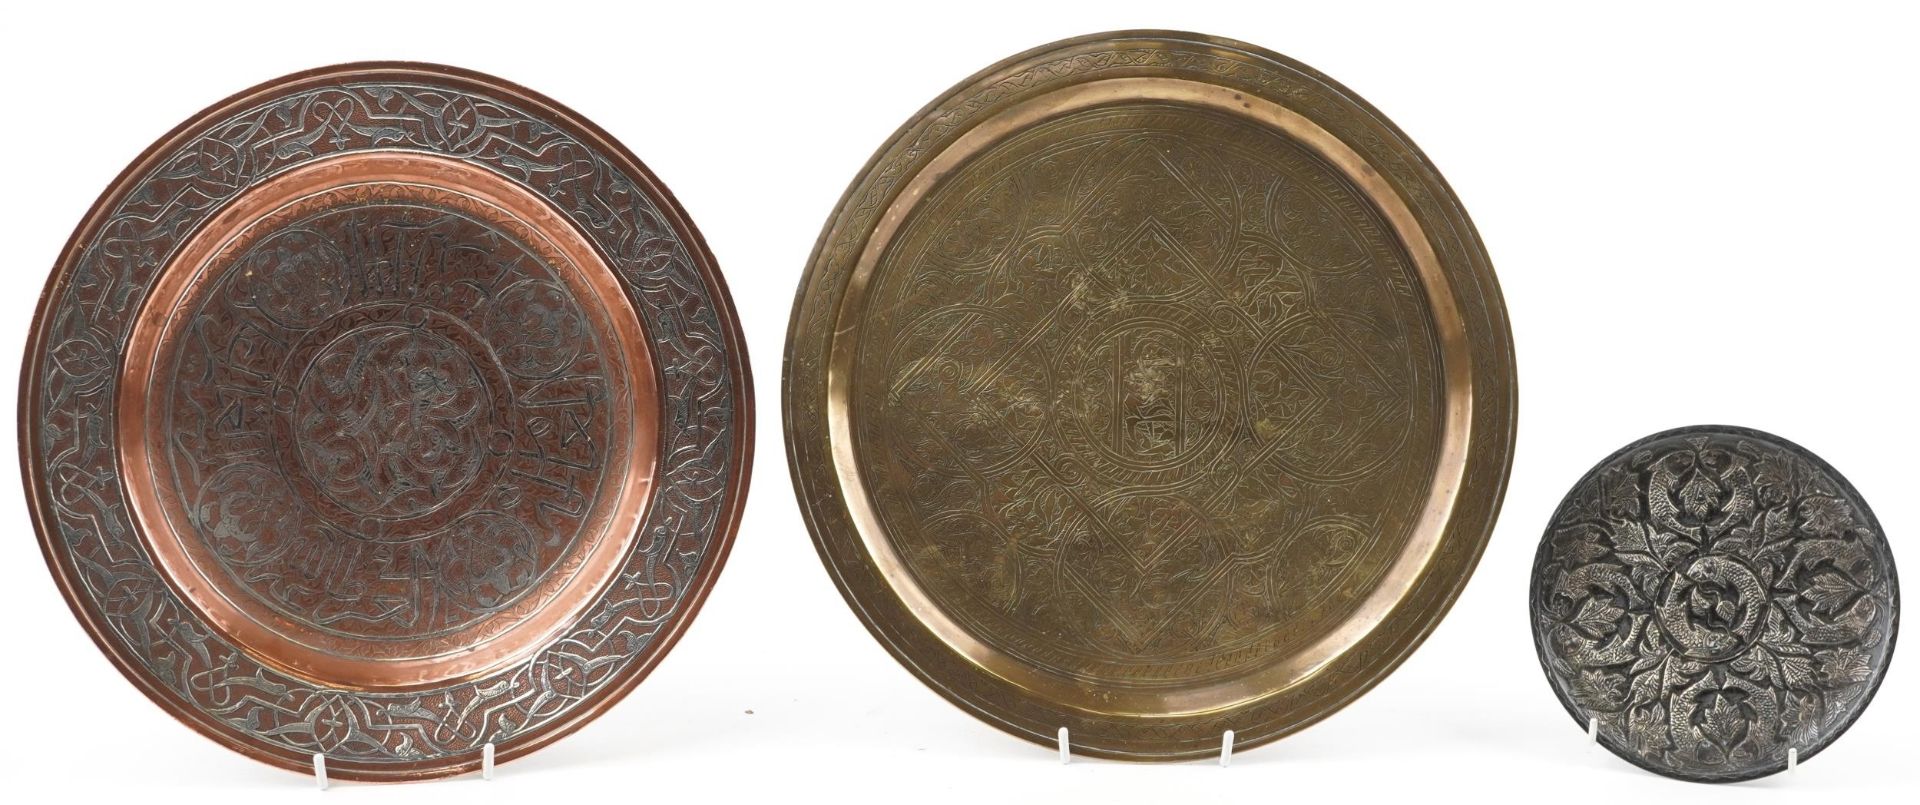 Islamic copper silver overlaid tray decorated with fish and flowers, Indian brass tray decorated